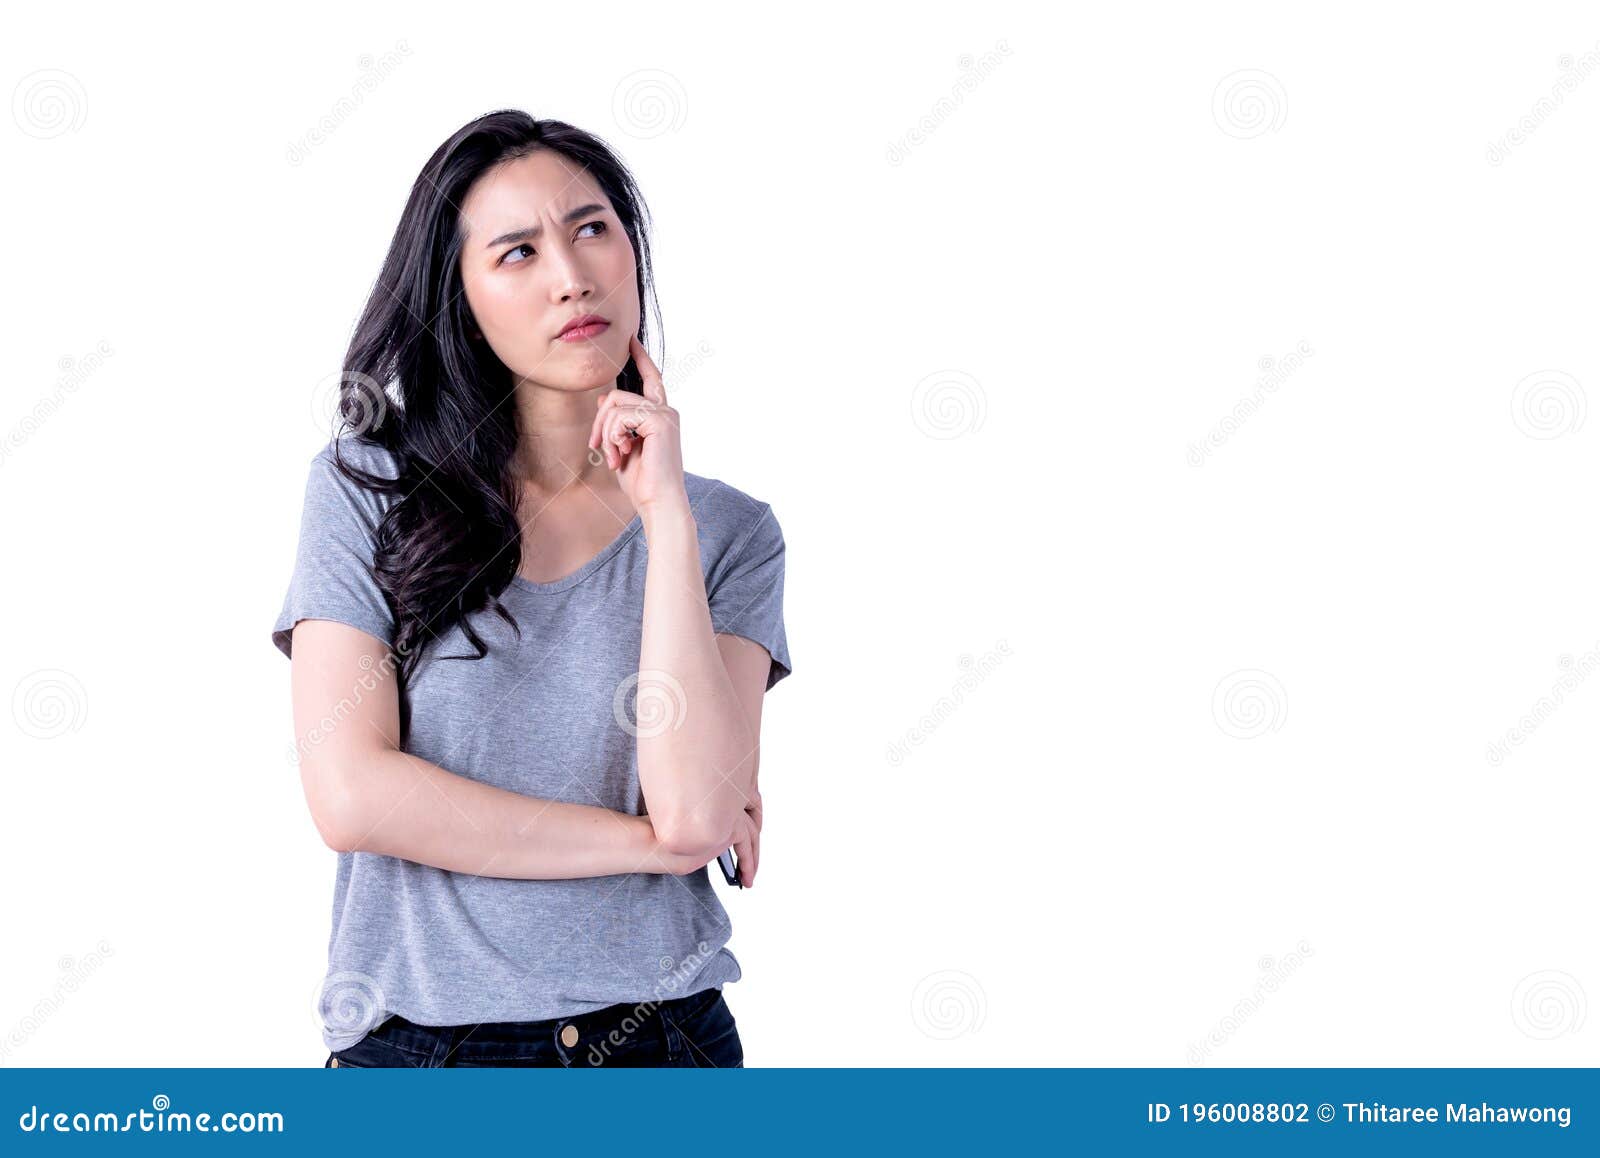 asian attractive woman standing and acting gestures using though